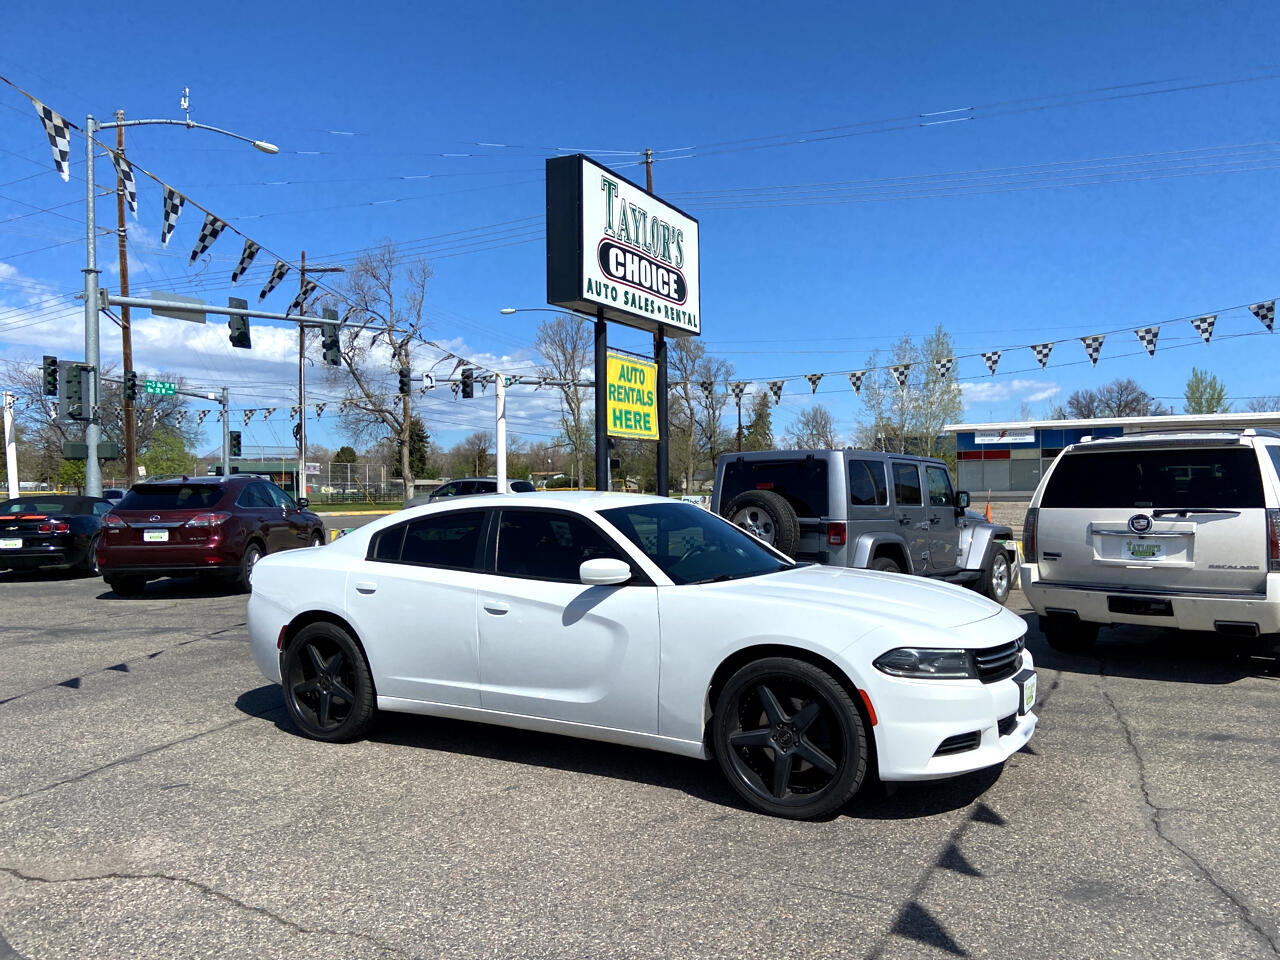 Dodge Charger 4dr Sdn SE AWD 2015